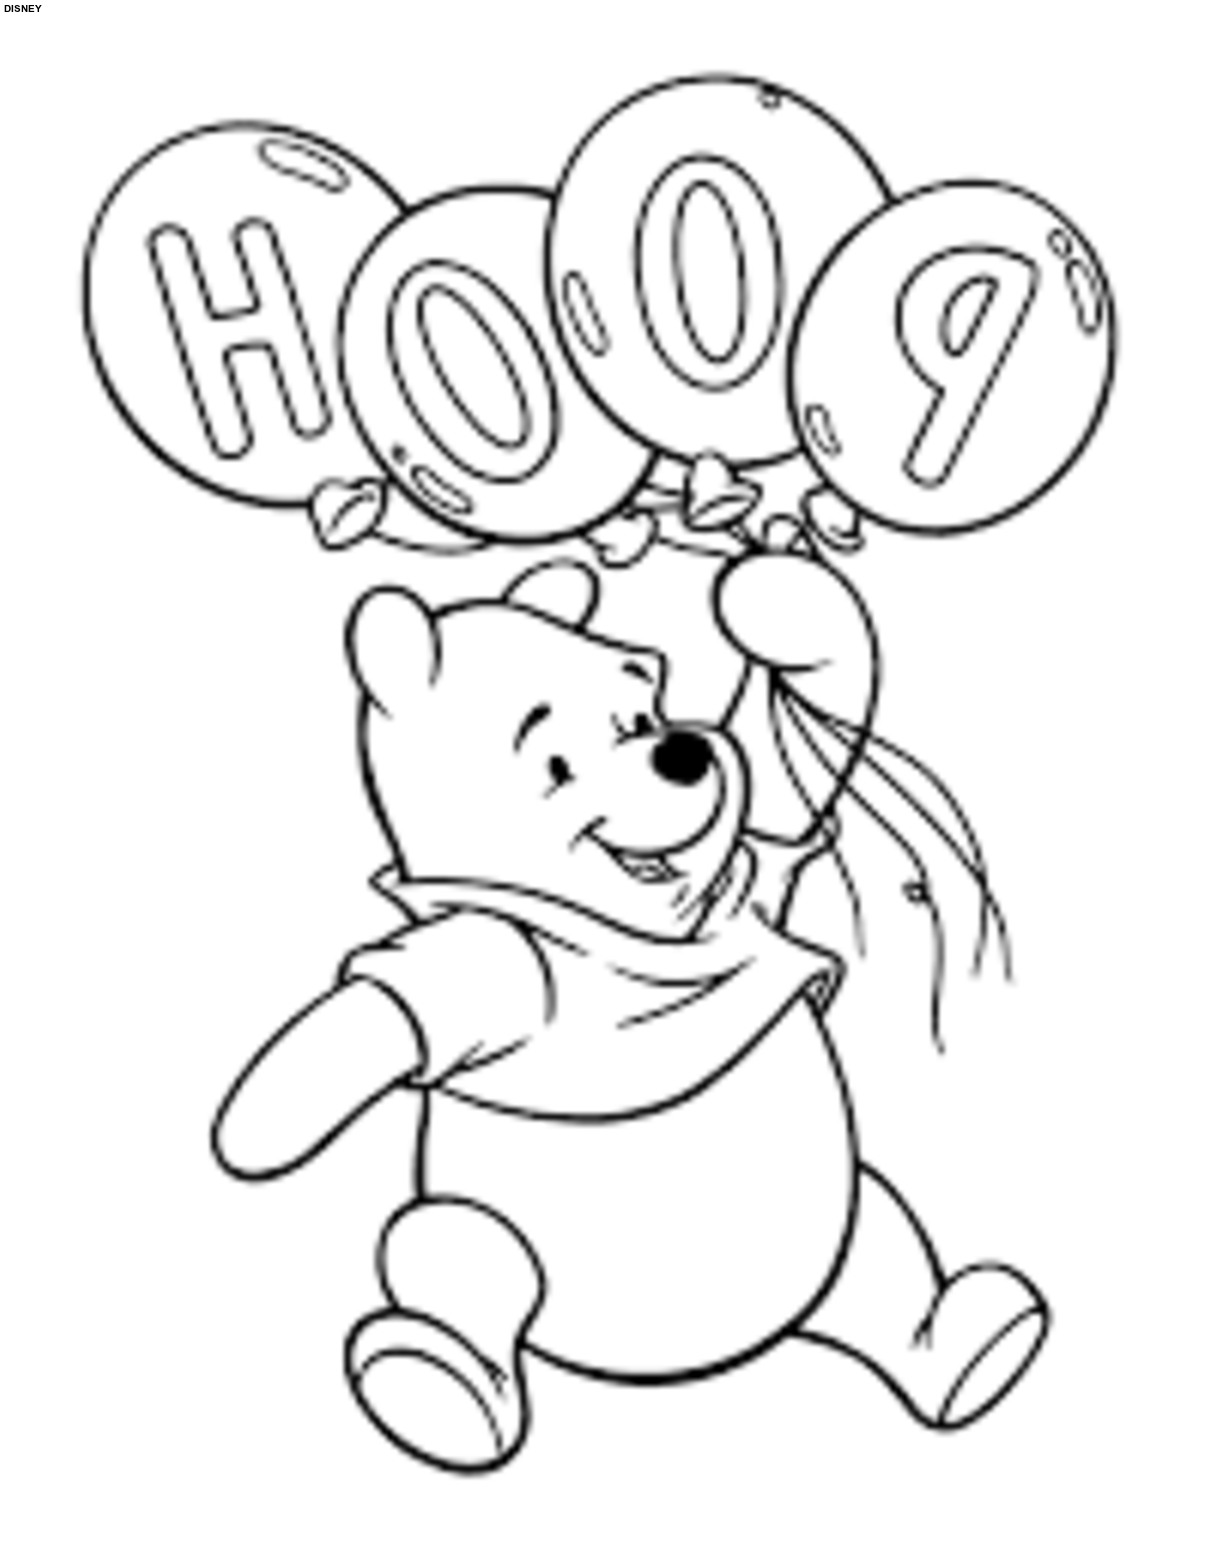 Disney colouring pages cartoon characters coloring pages 